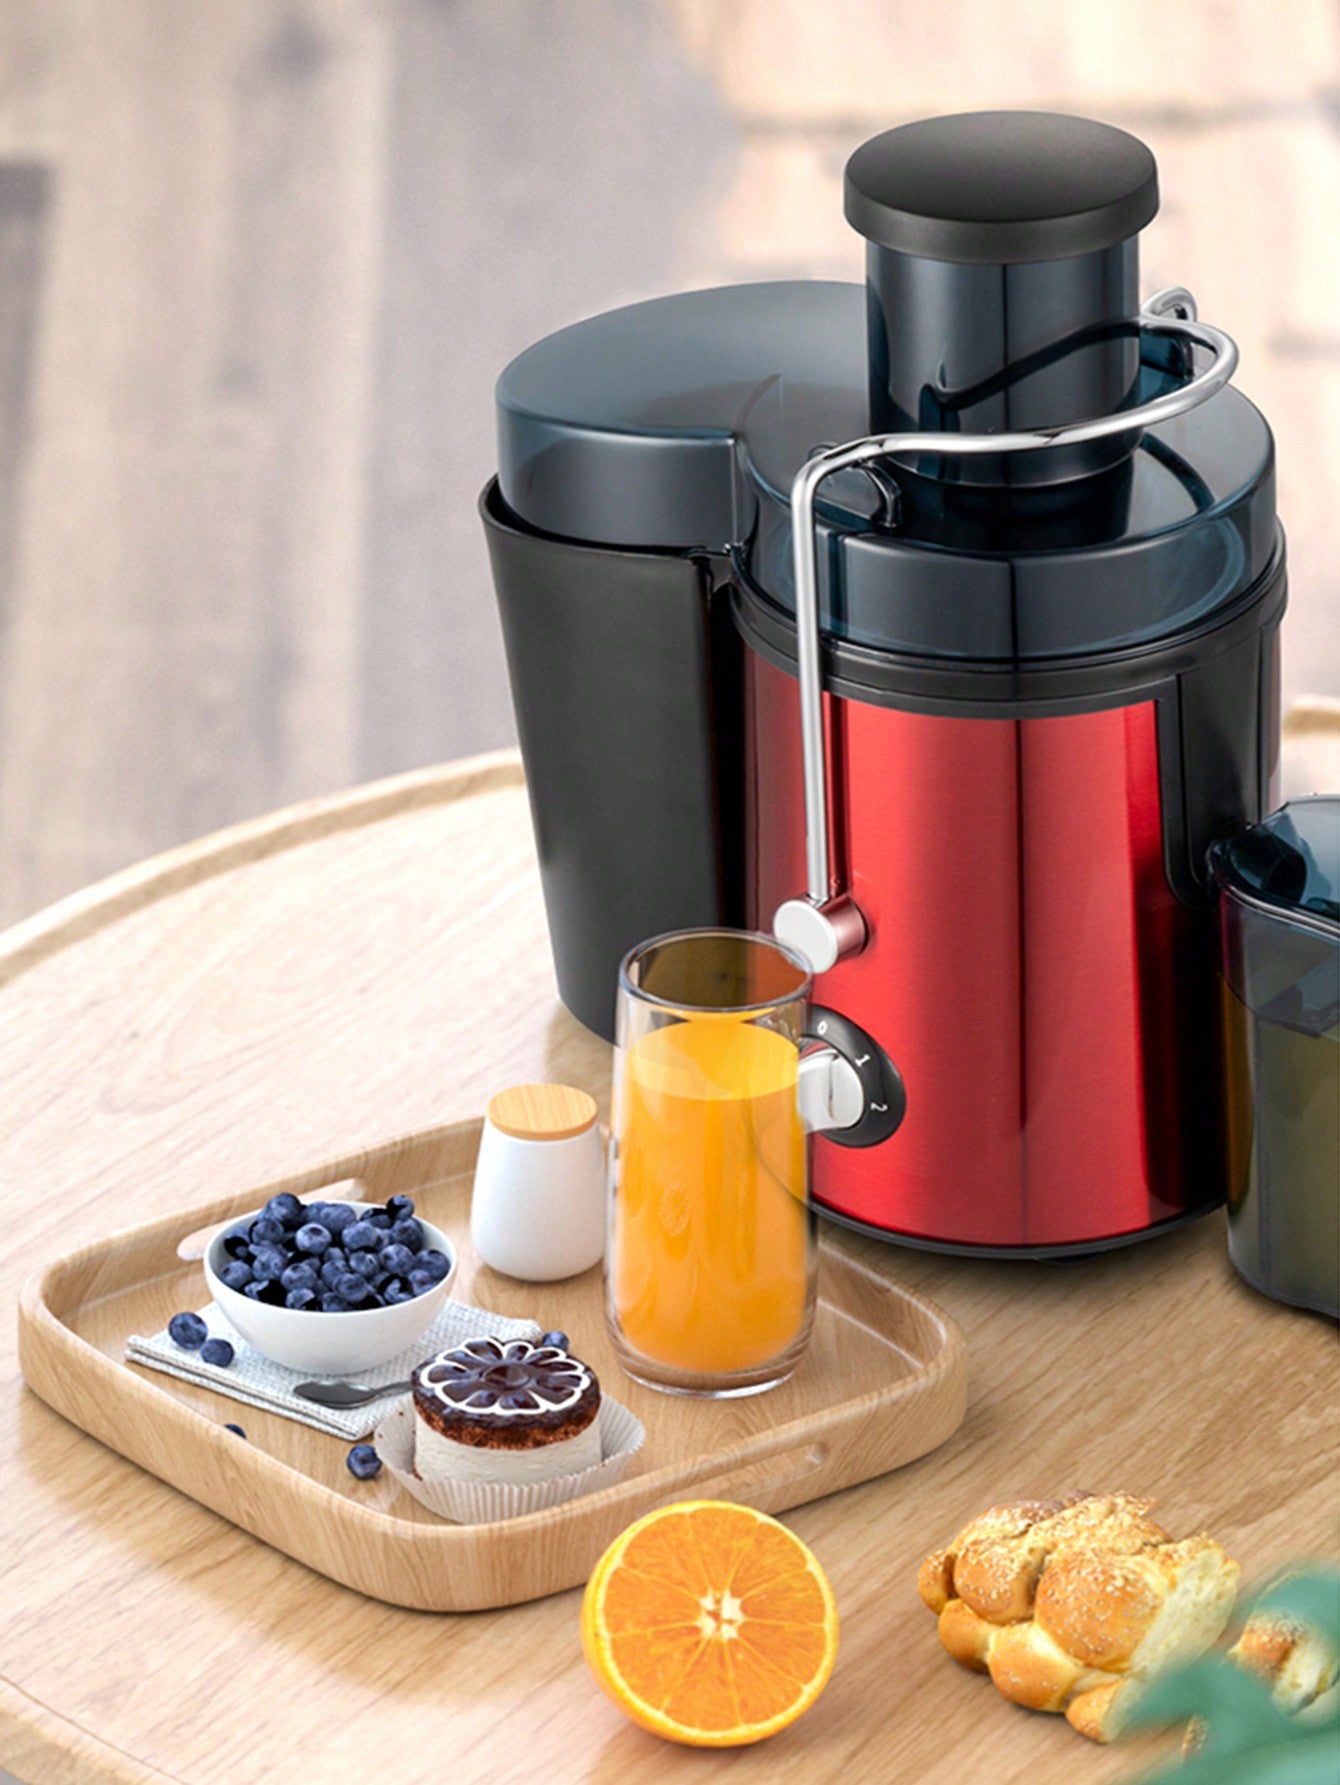 1pc Uk Standard Easy-clean Juicer, Pulp Separation Design, 400w High Power, 65cm Wide Feeder Chute, 450ml Juice Cup, Free Cleaning Brush Included--2